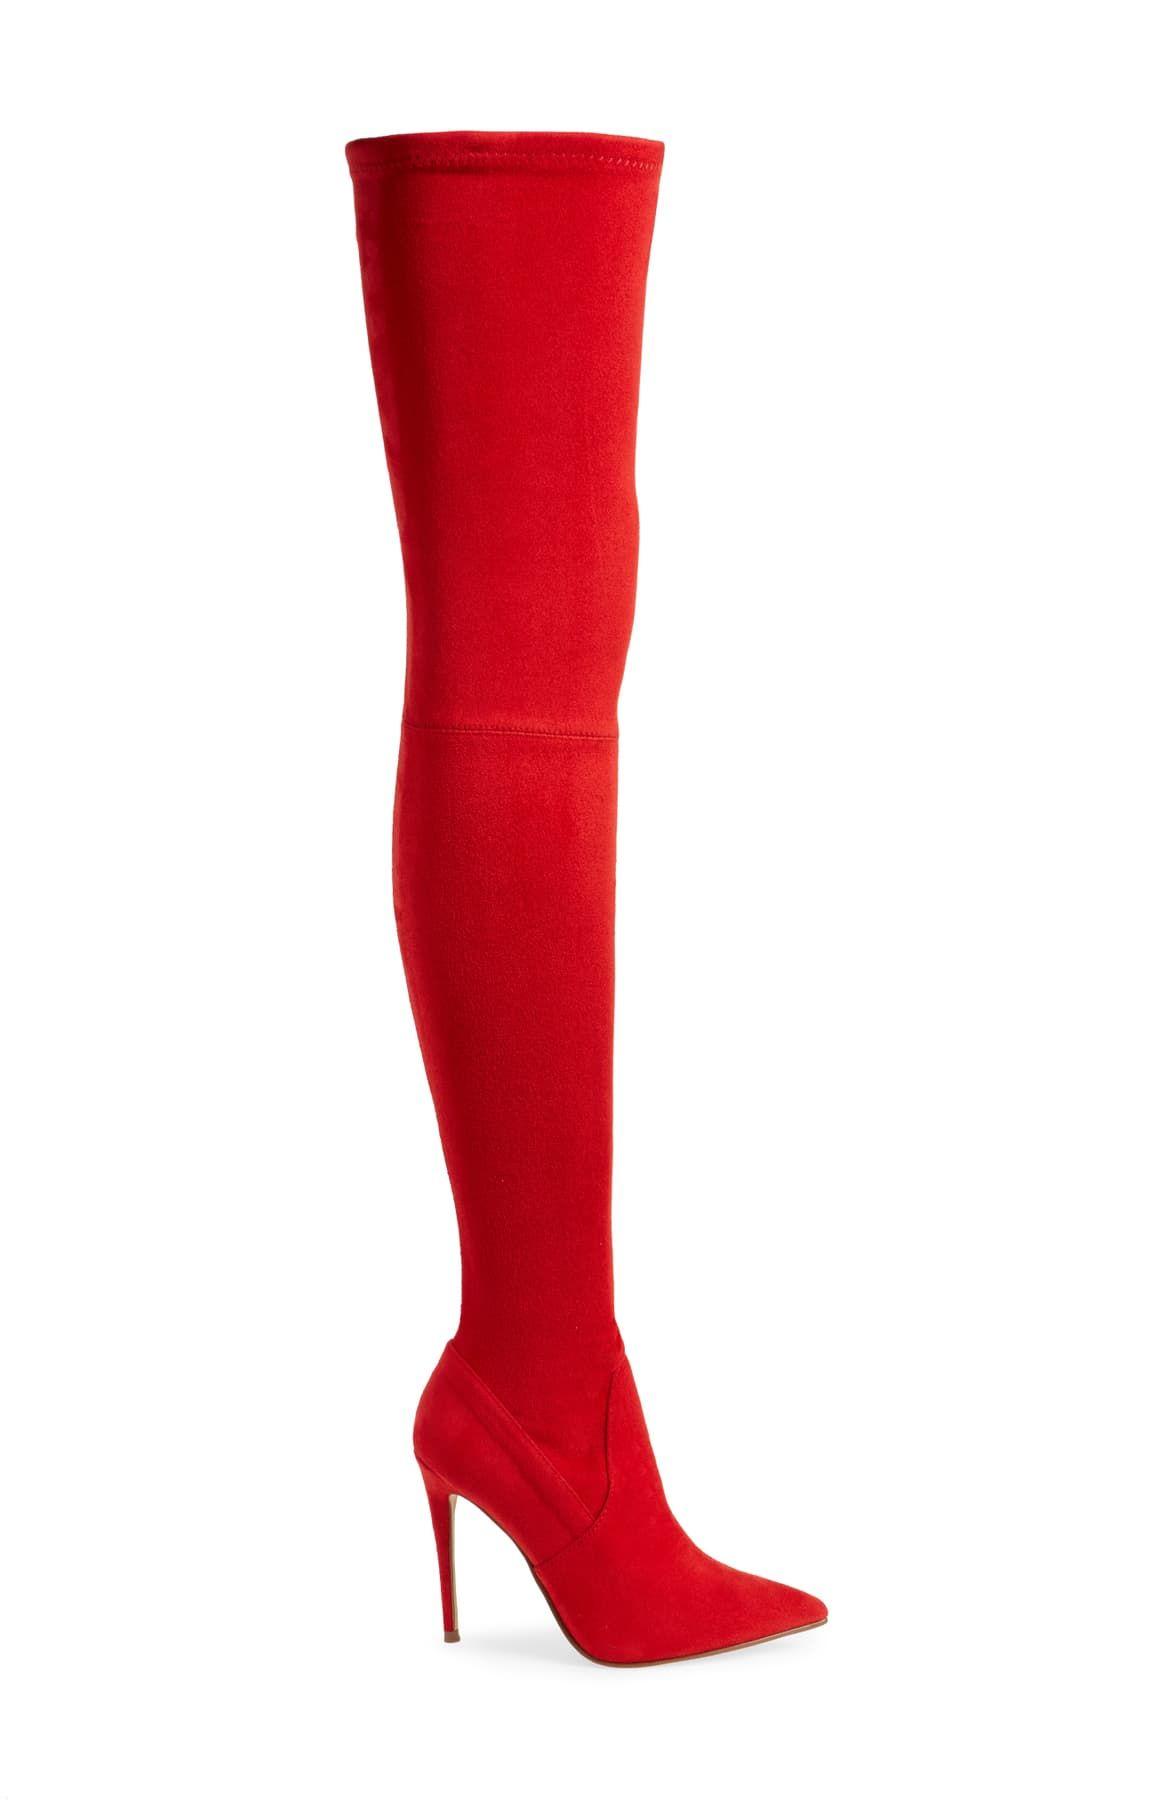 Red thigh high boots - recoveryparade-japan.com